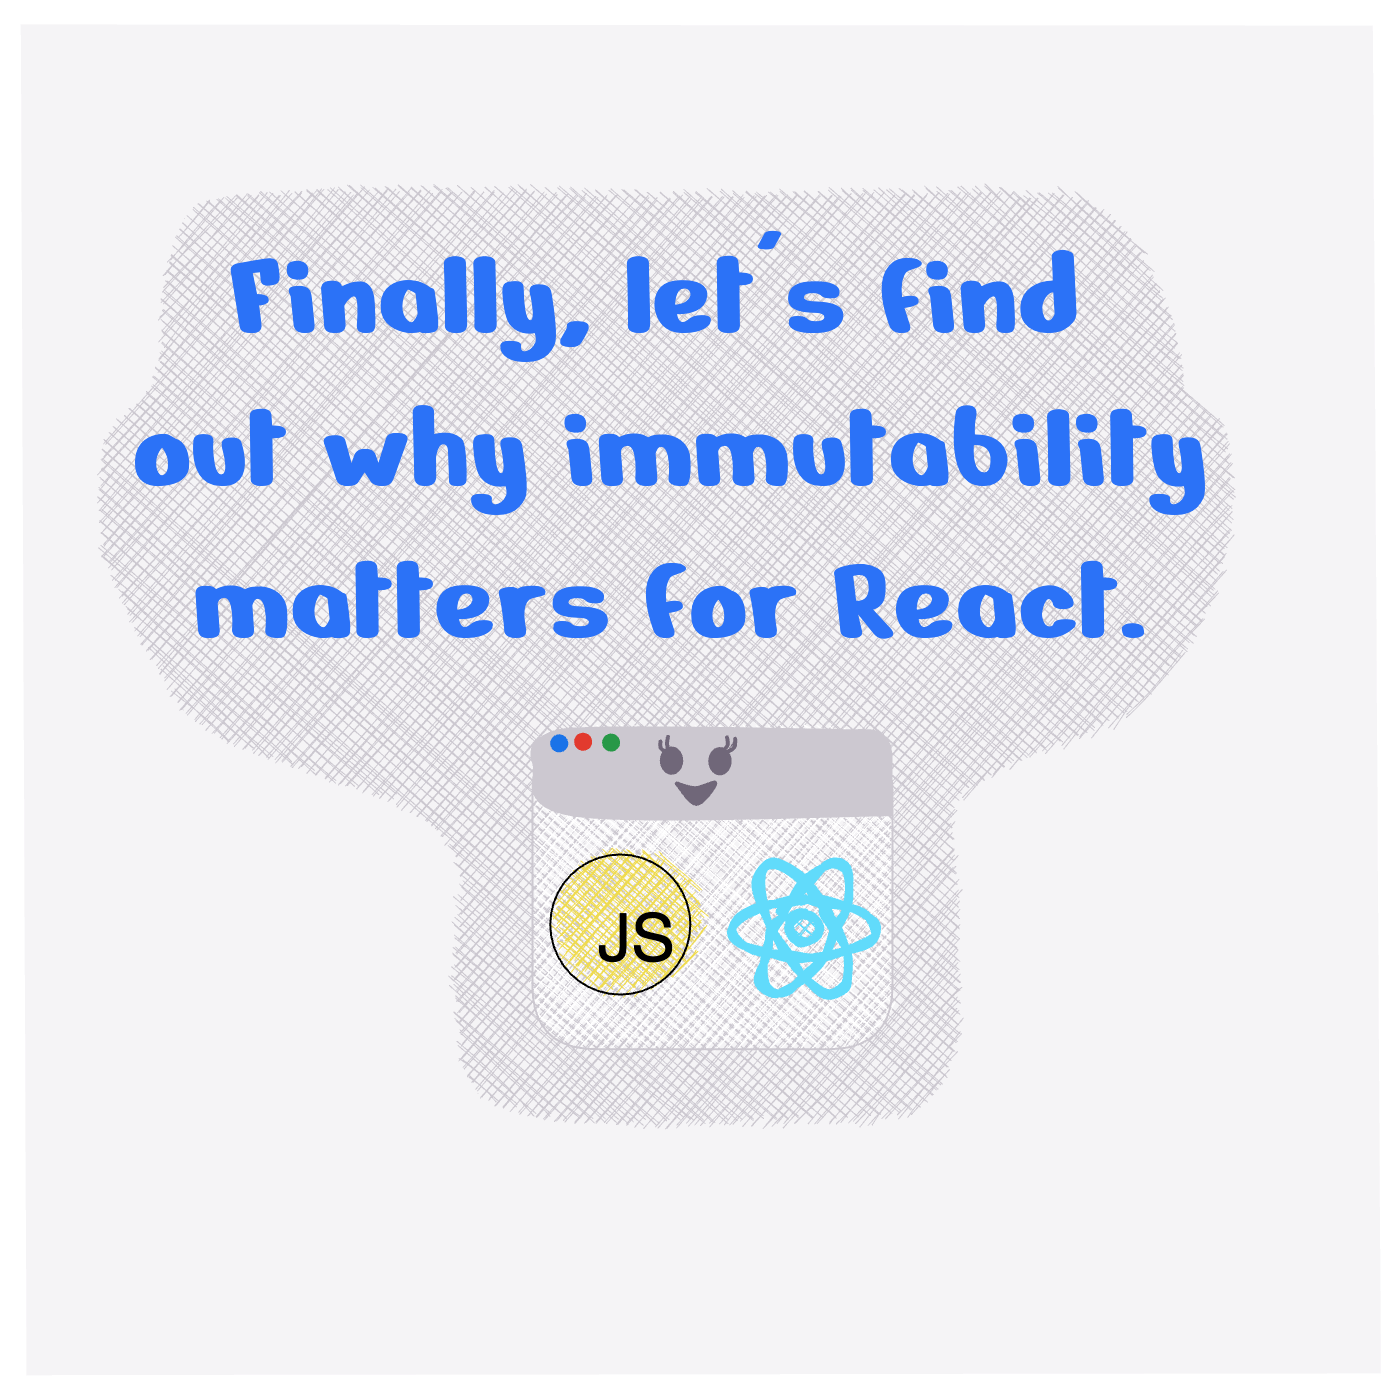 Finally, let's find out why immutability matters for React.